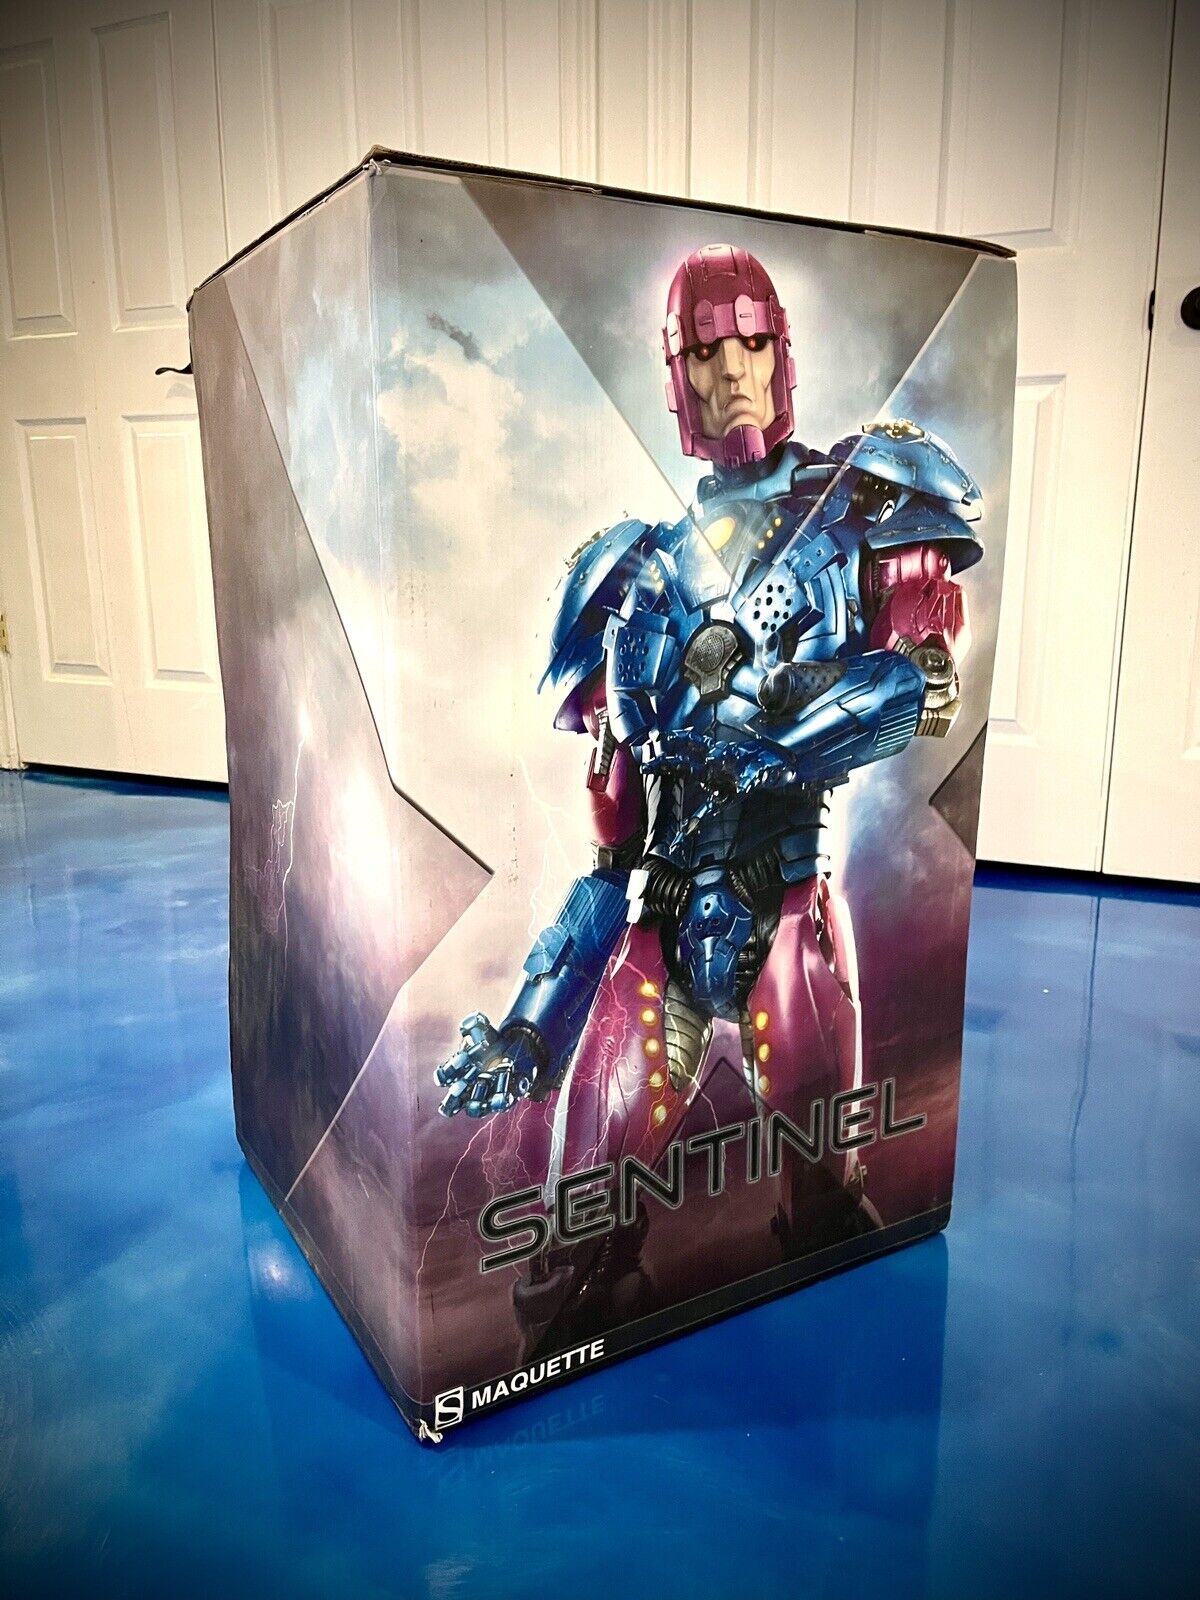 X-Men Sentinel Maquette Statue Exclusive Marvel Sample by Sideshow *some damage*